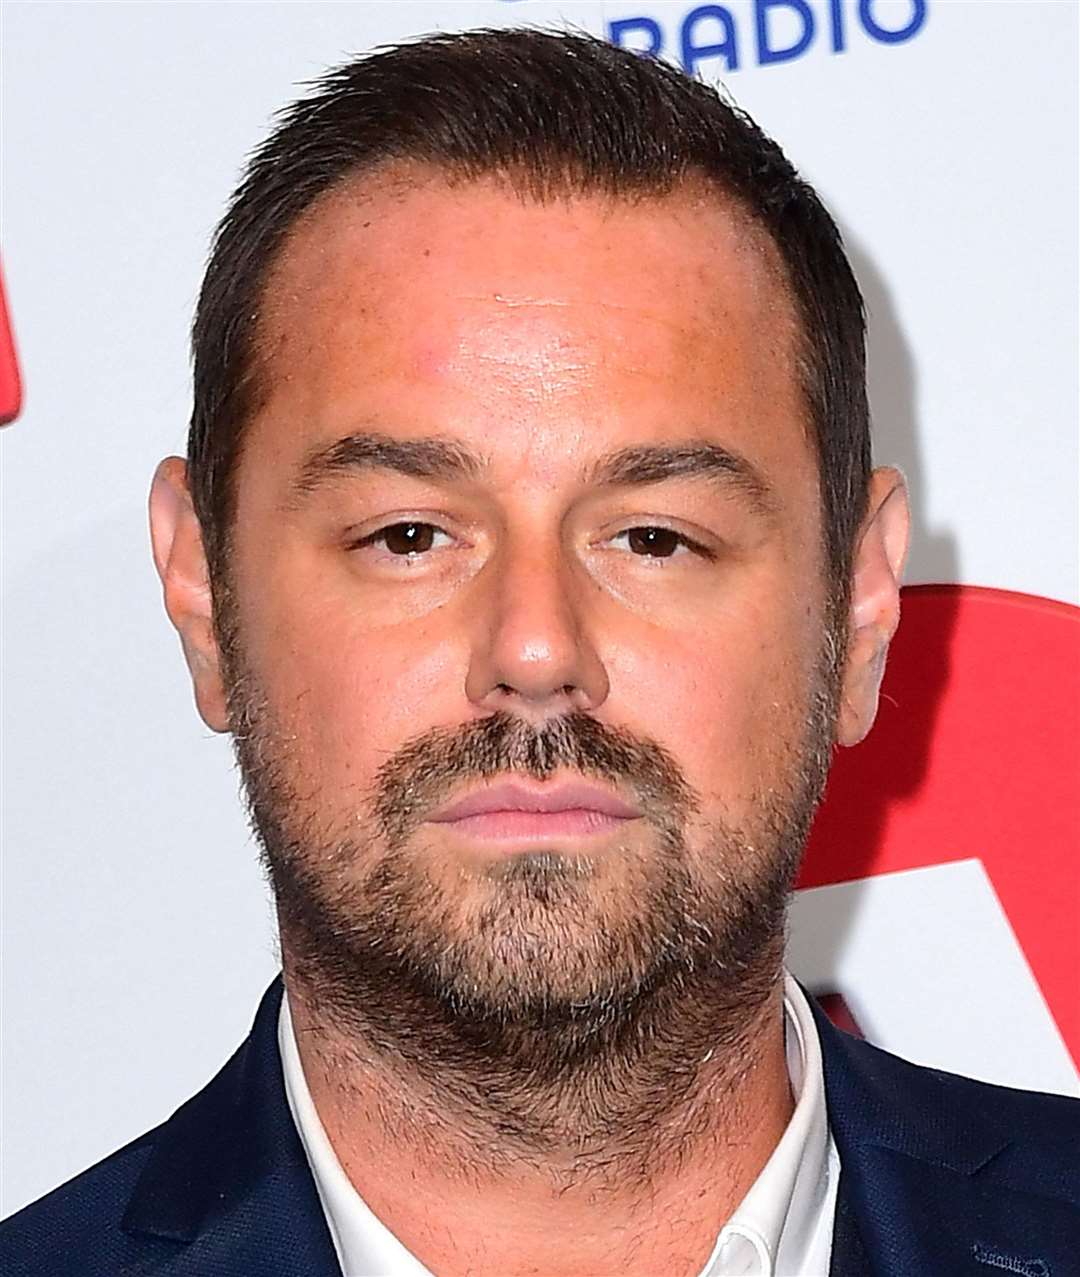 Danny Dyer visited Leeds Castle for the programme Picture: Ian West/PA Photos